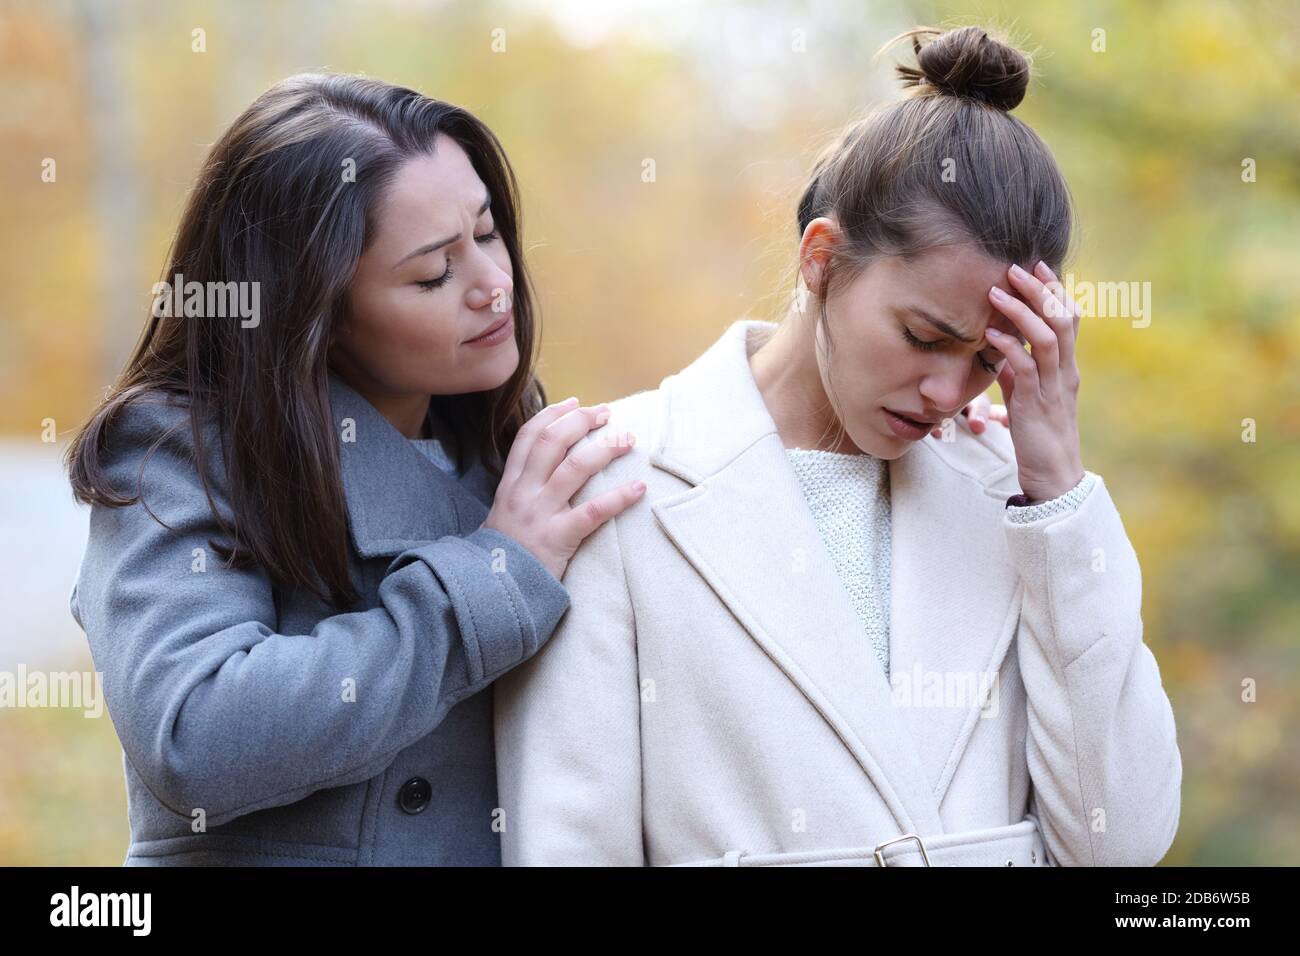 Woman comforting her sad best friend who is complaining in a park in winter Stock Photo